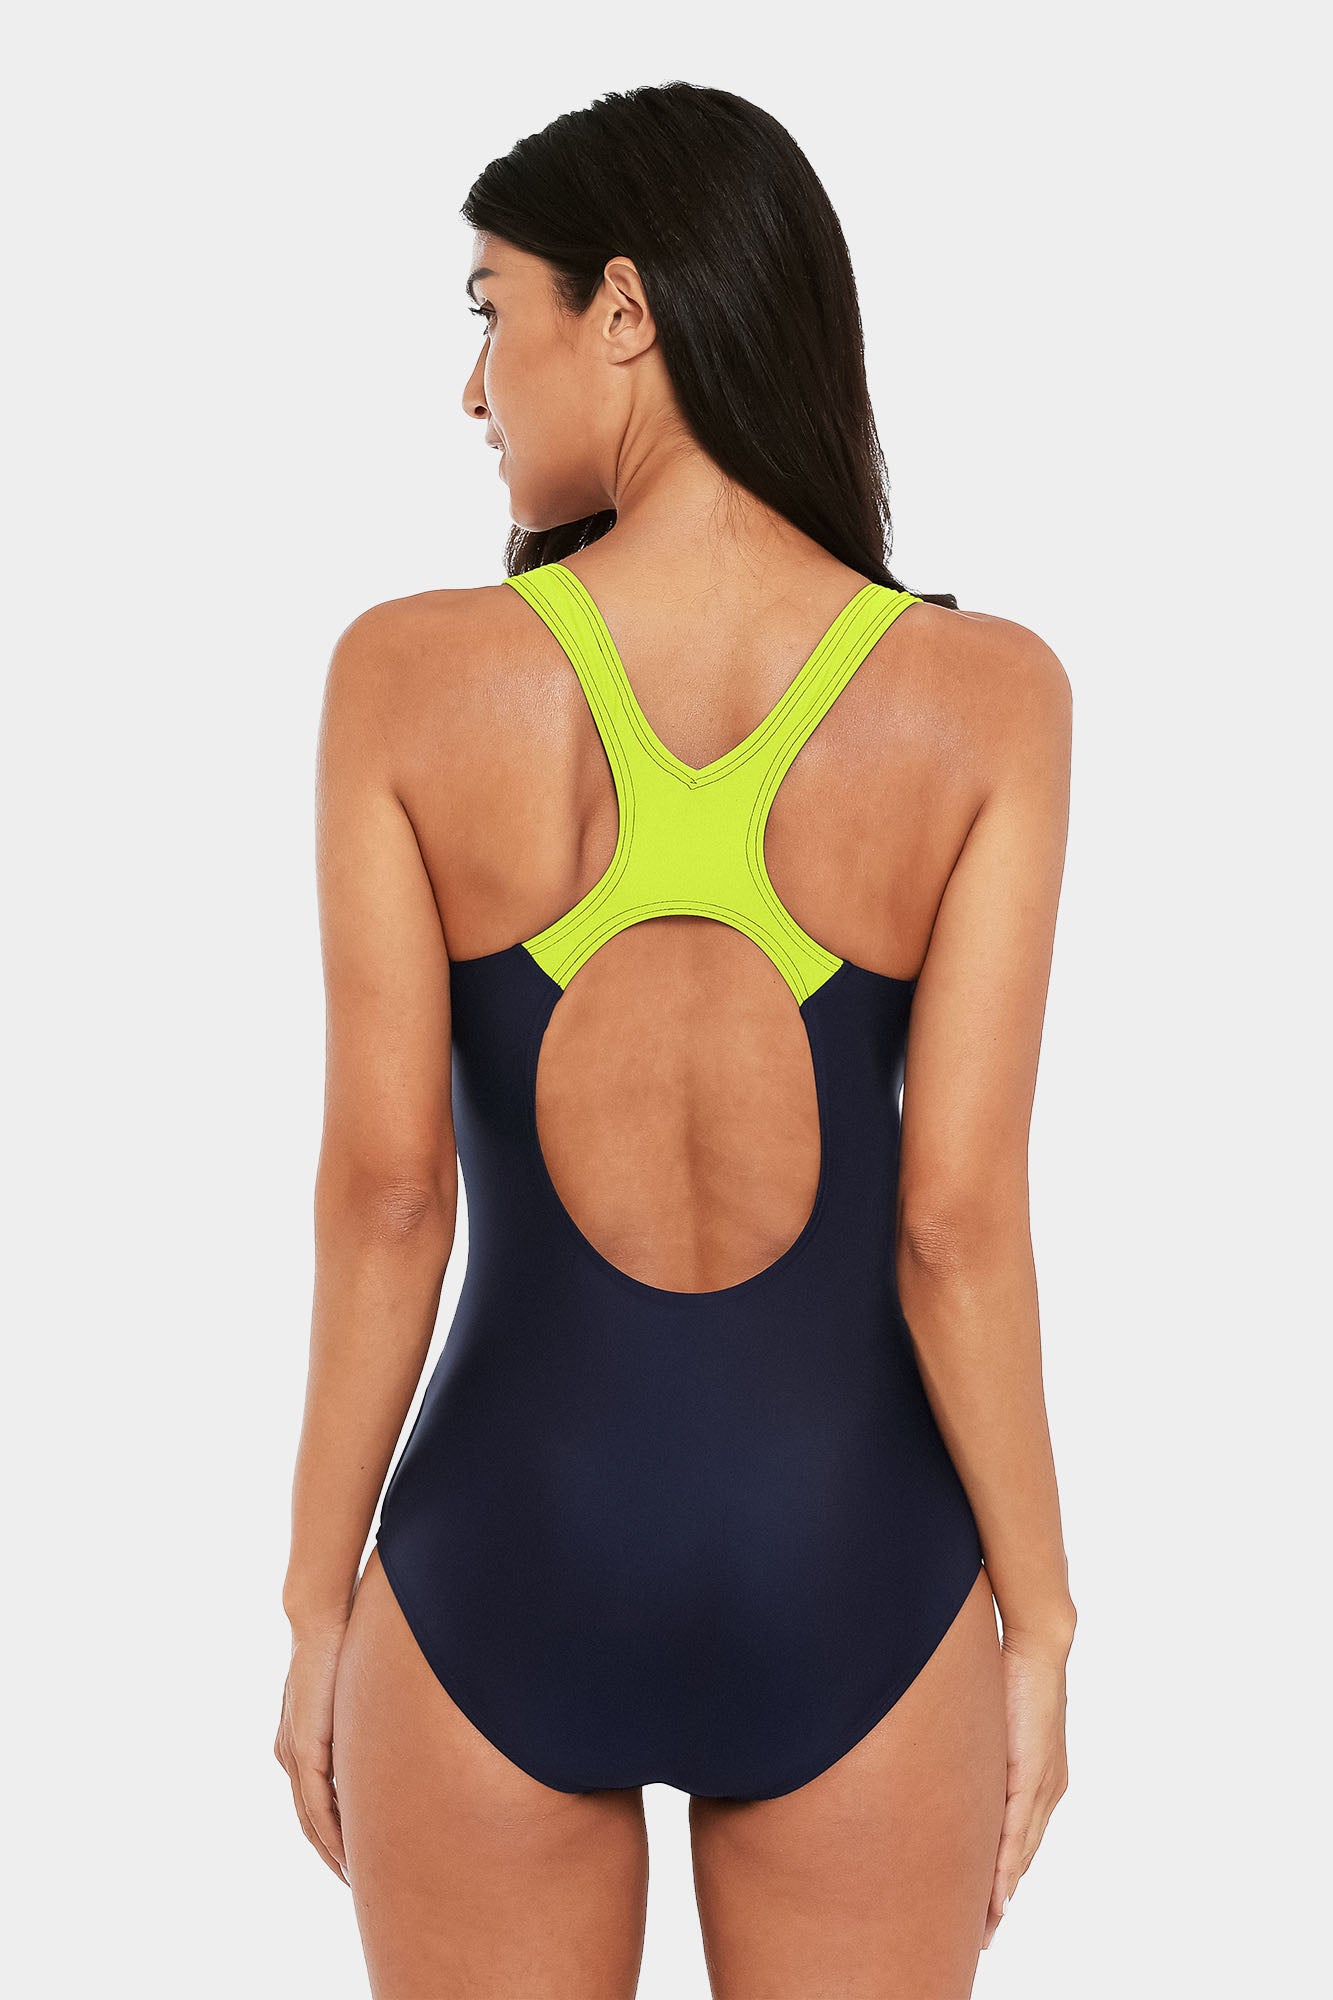 Attraco Yellow Women's Colorblock Slimming One Piece Swimsuit-Attraco | Fashion Outdoor Clothing